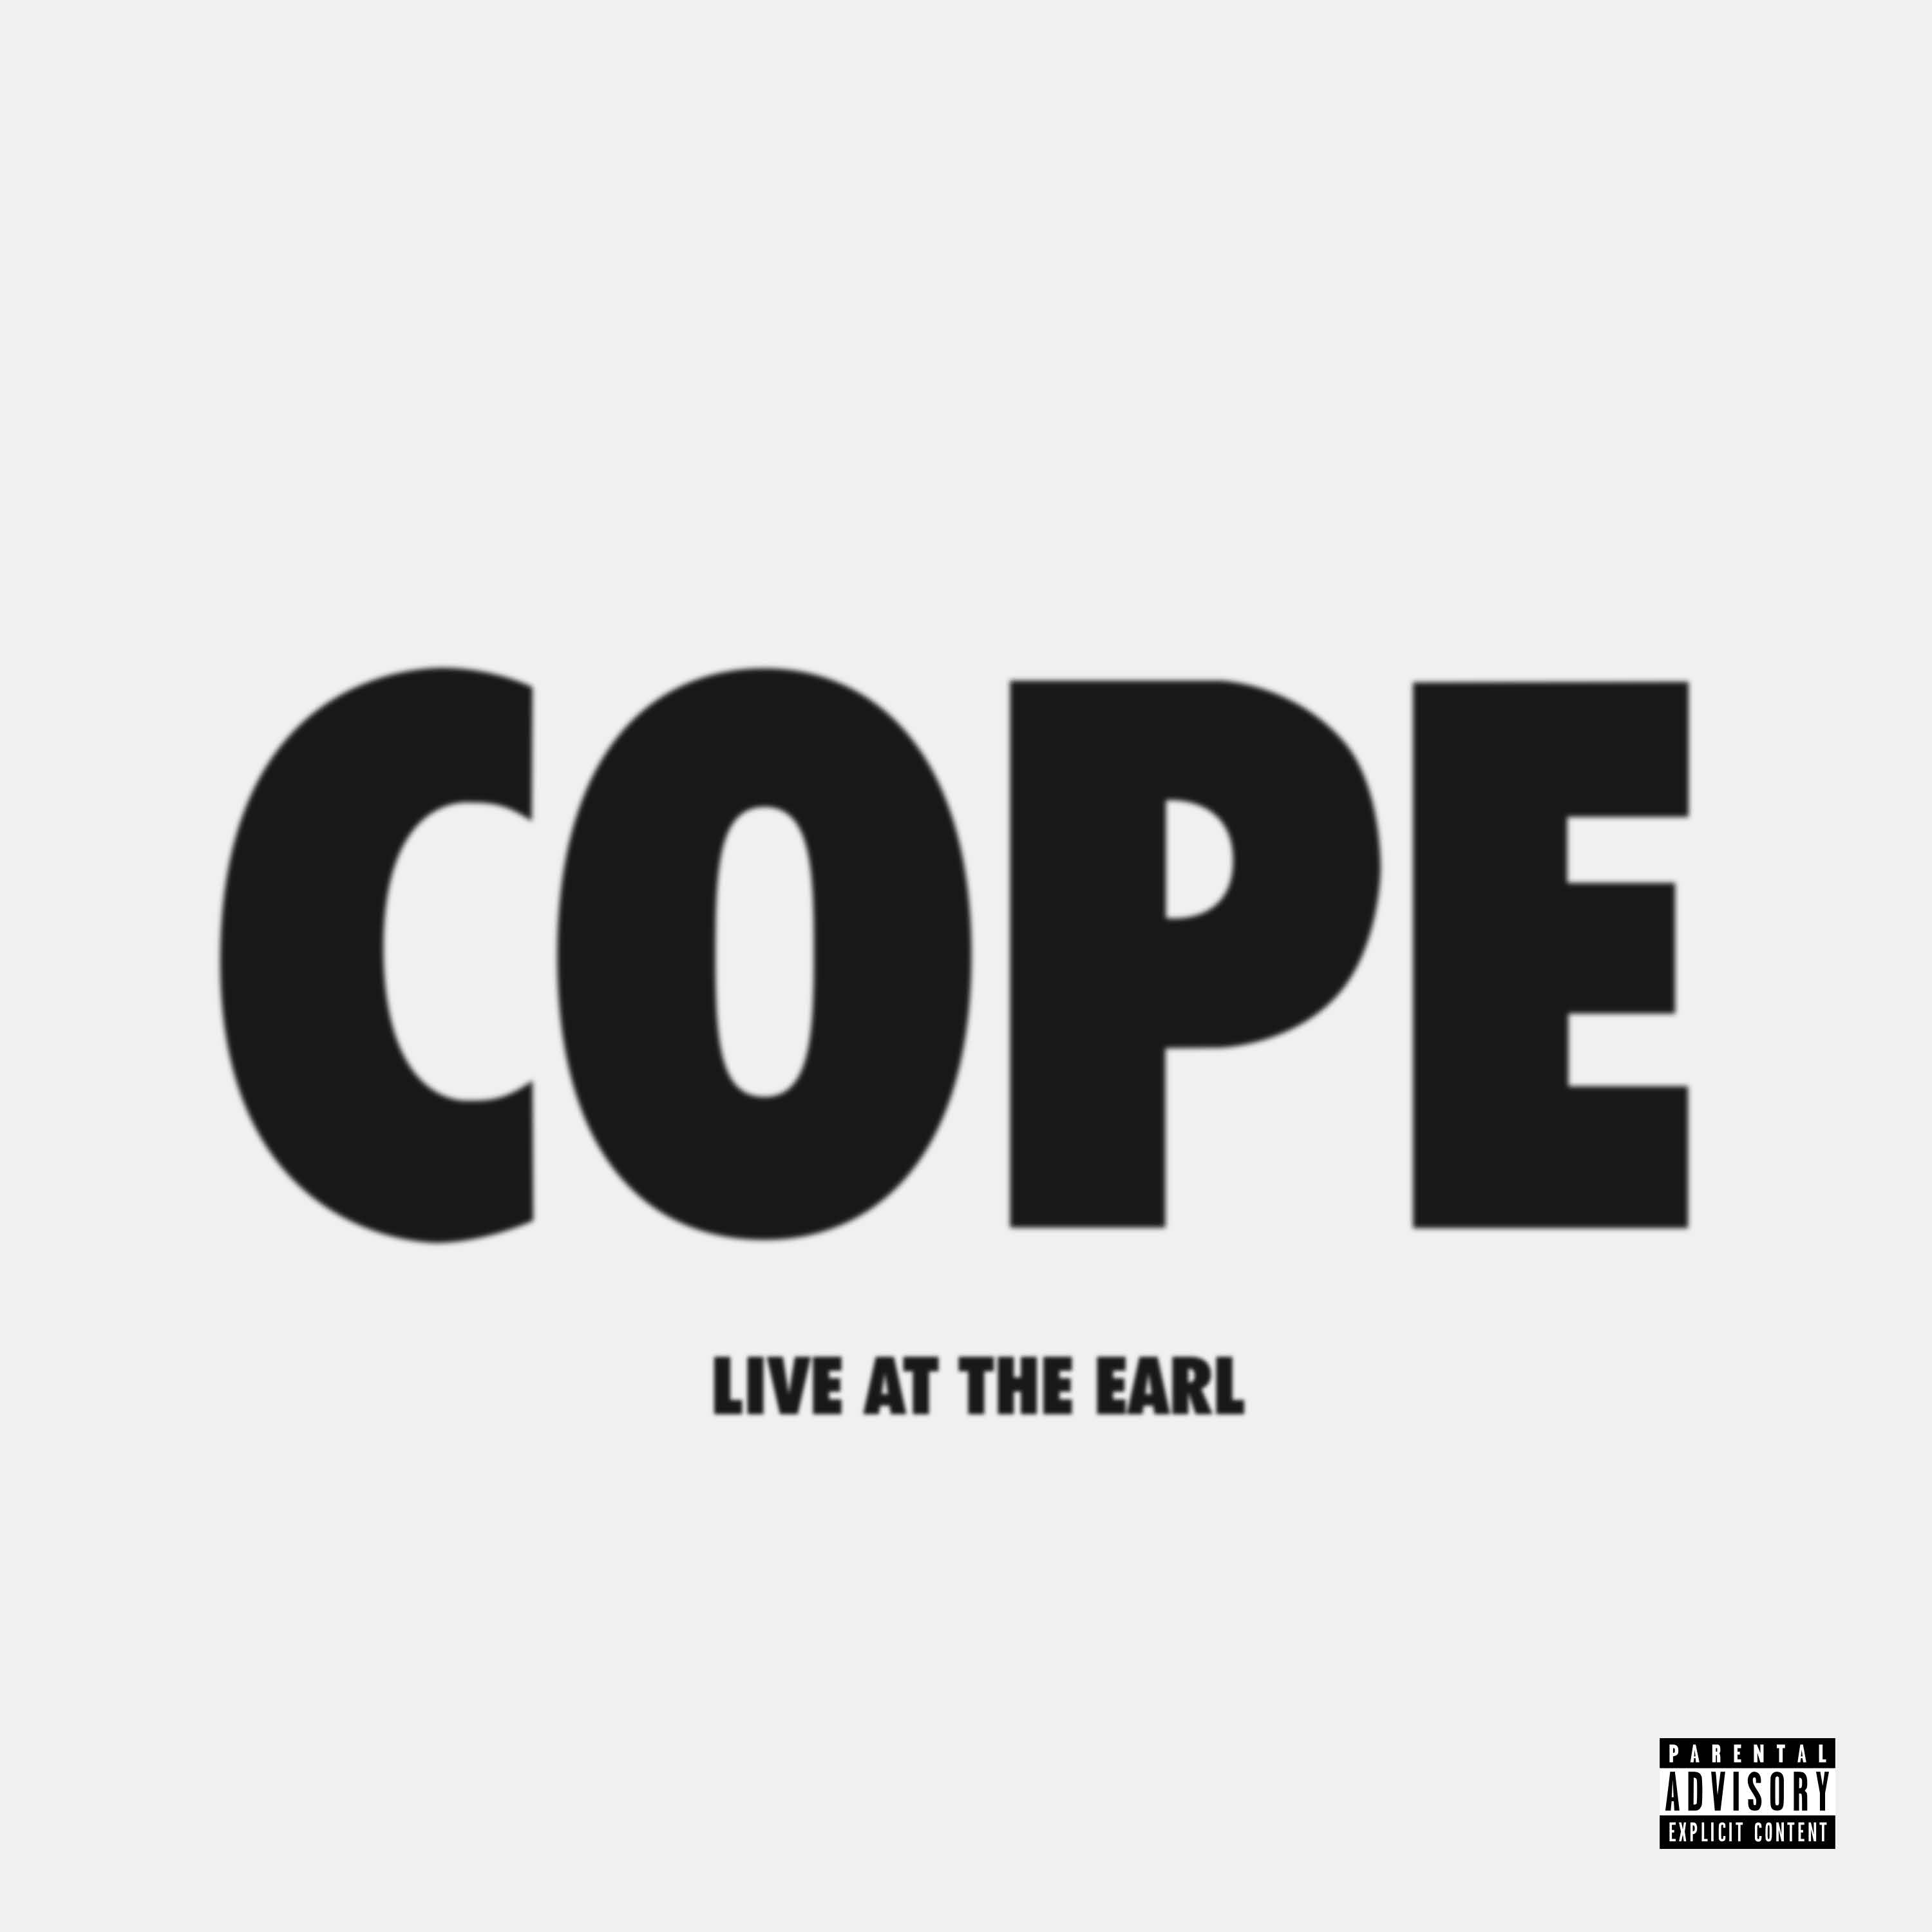 Manchester Orchestra - COPE - Live at The Earl: Limited 'Bone' Vinyl LP